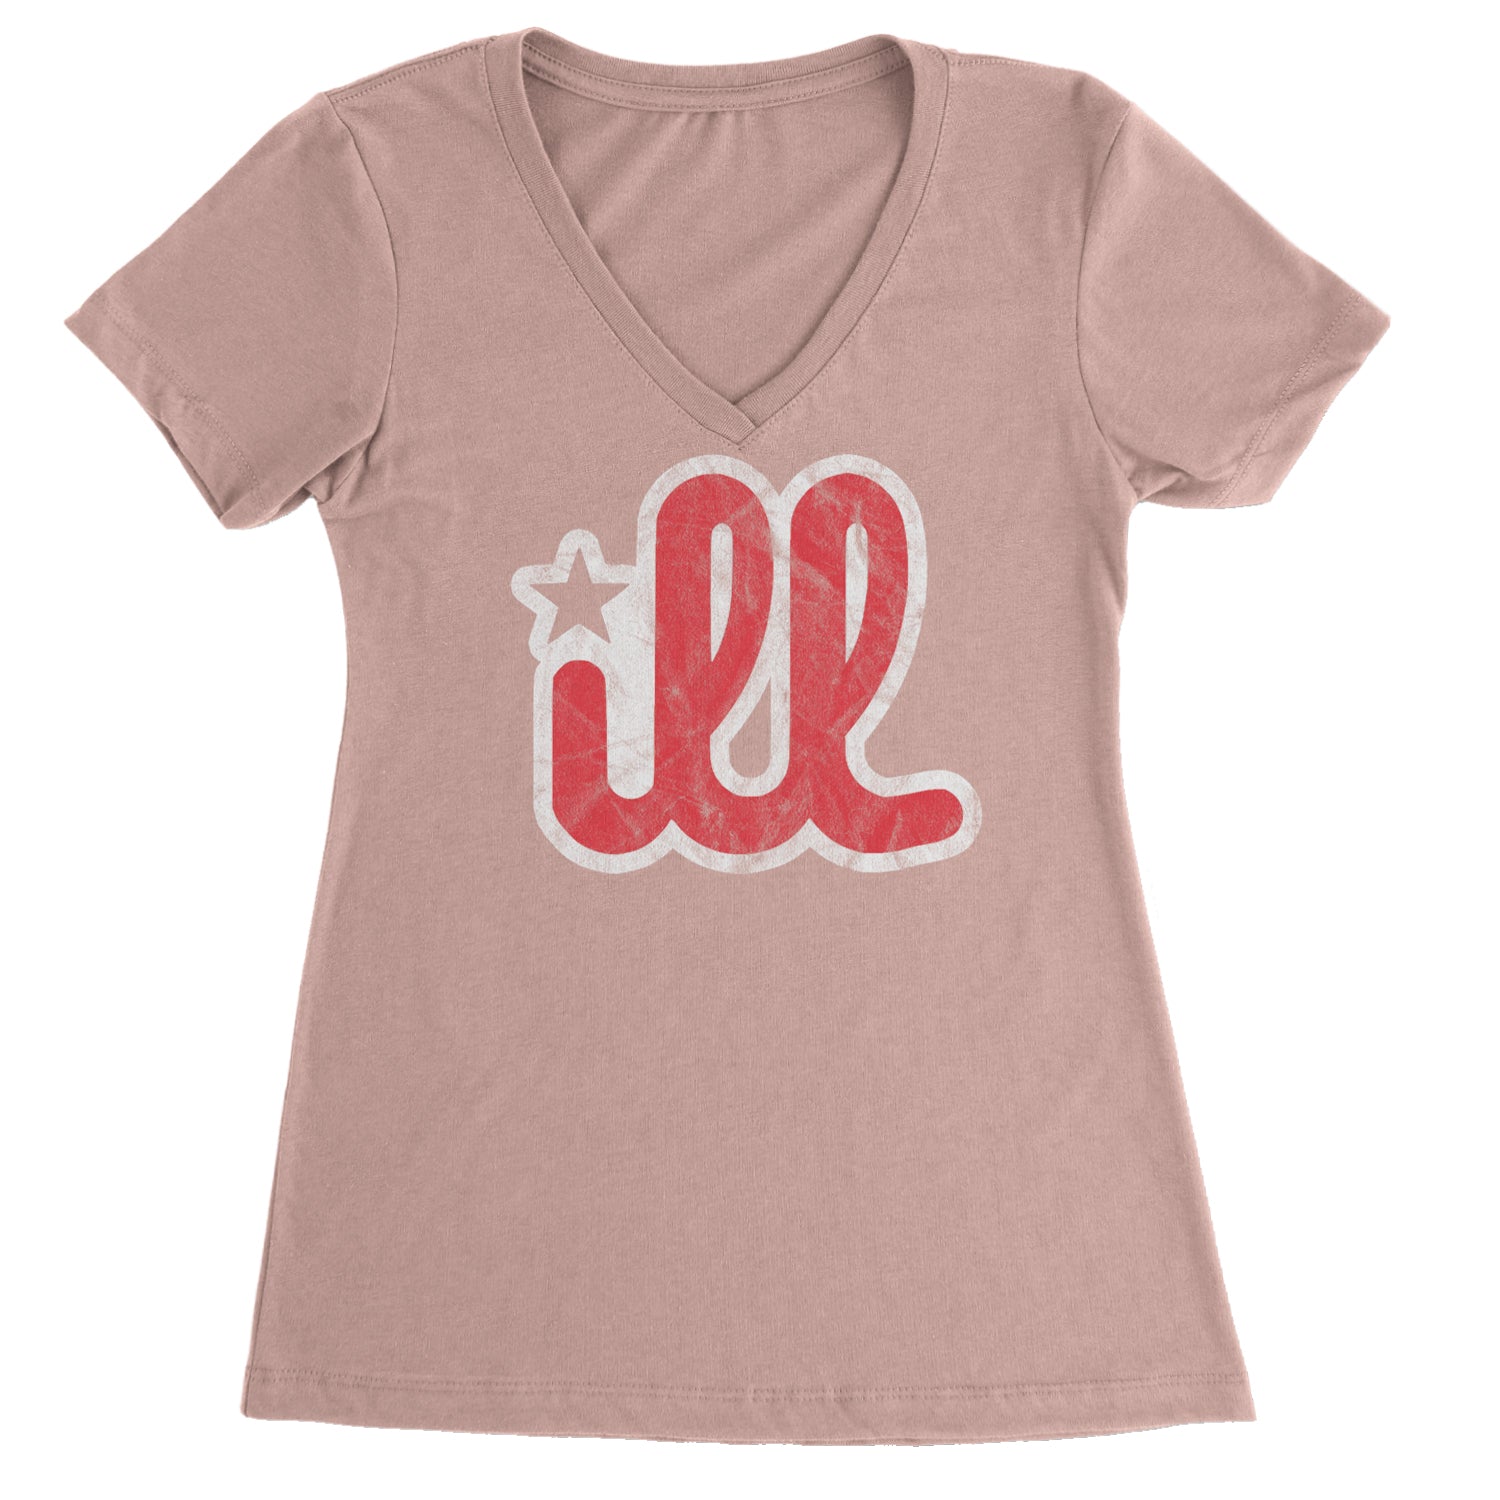 ILL Vintage It's A Philadelphia Philly Thing Ladies V-Neck T-shirt Light Pink